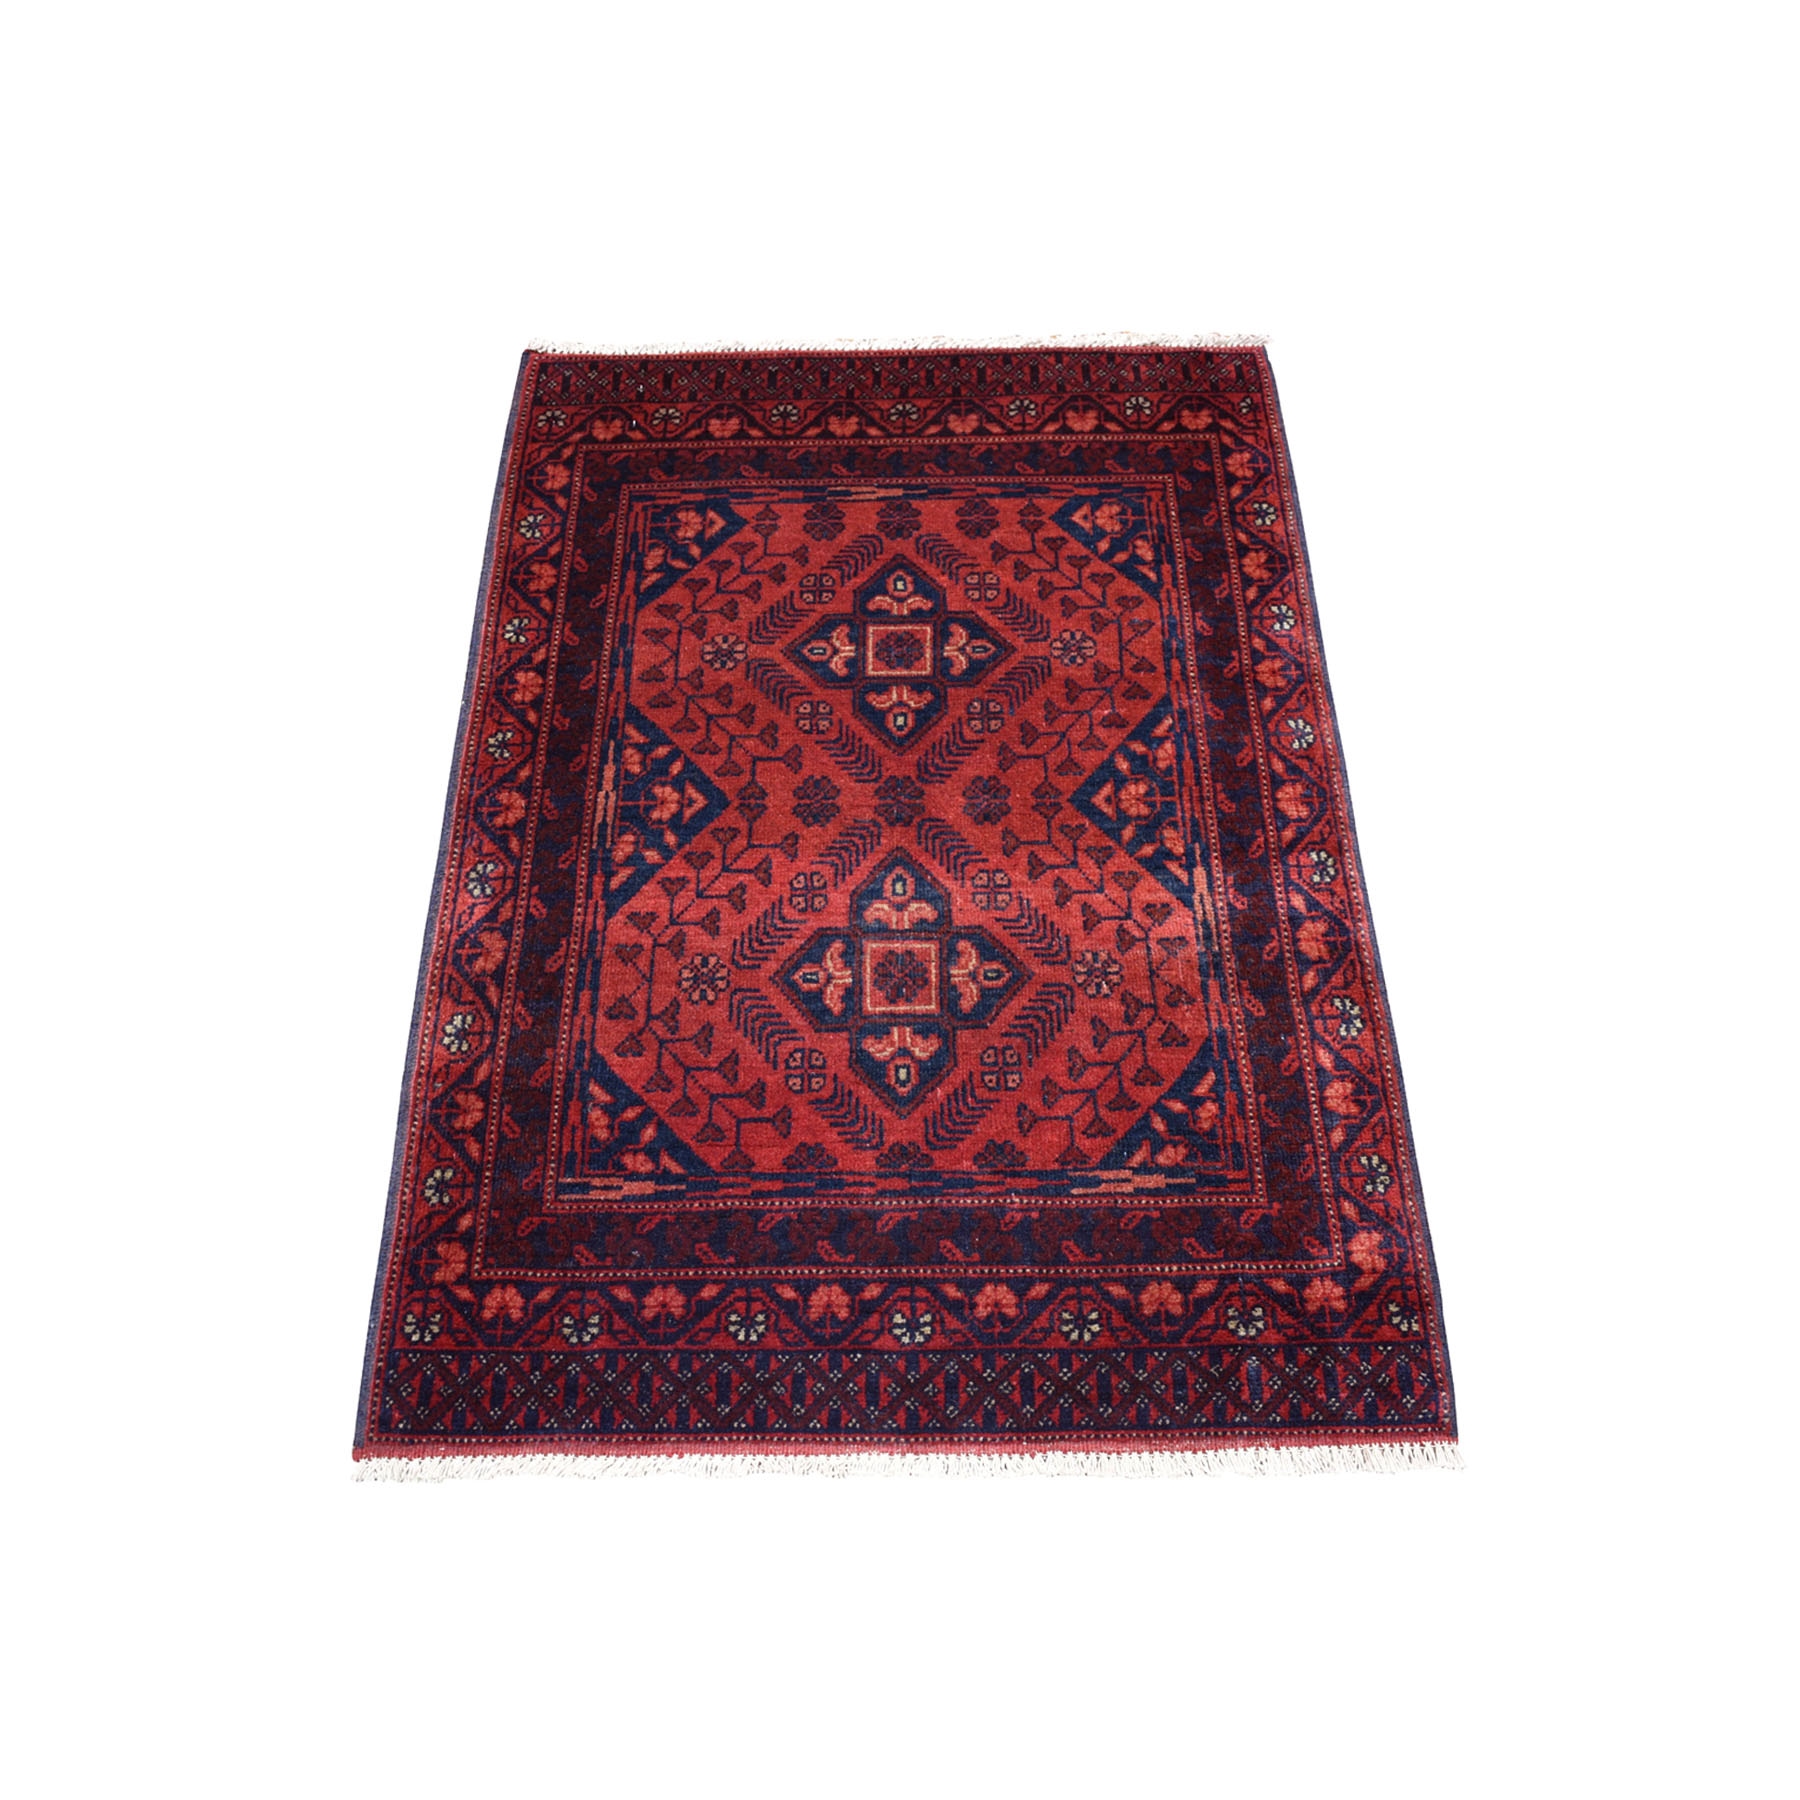 2'8"X3'10" Deep And Saturated Red Geometric Afghan Andkhoy Pure Wool Hand Knotted Oriental Rug moaece06